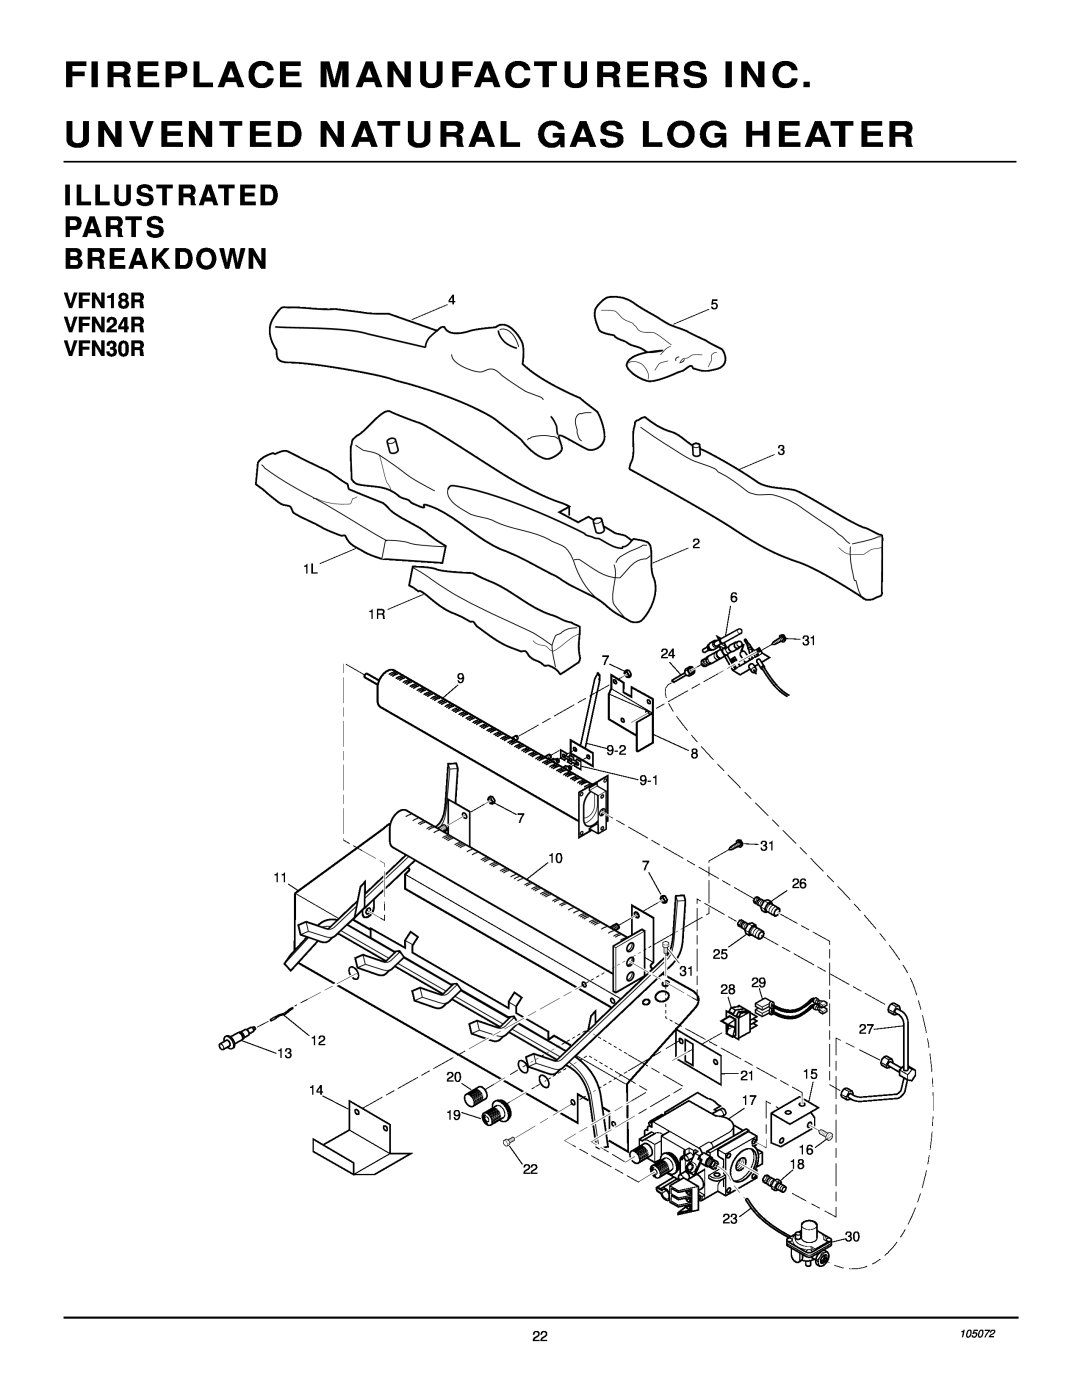 Desa VFN24R, VFN30R, VFN18R Illustrated Parts Breakdown, Fireplace Manufacturers Inc, Unvented Natural Gas Log Heater 